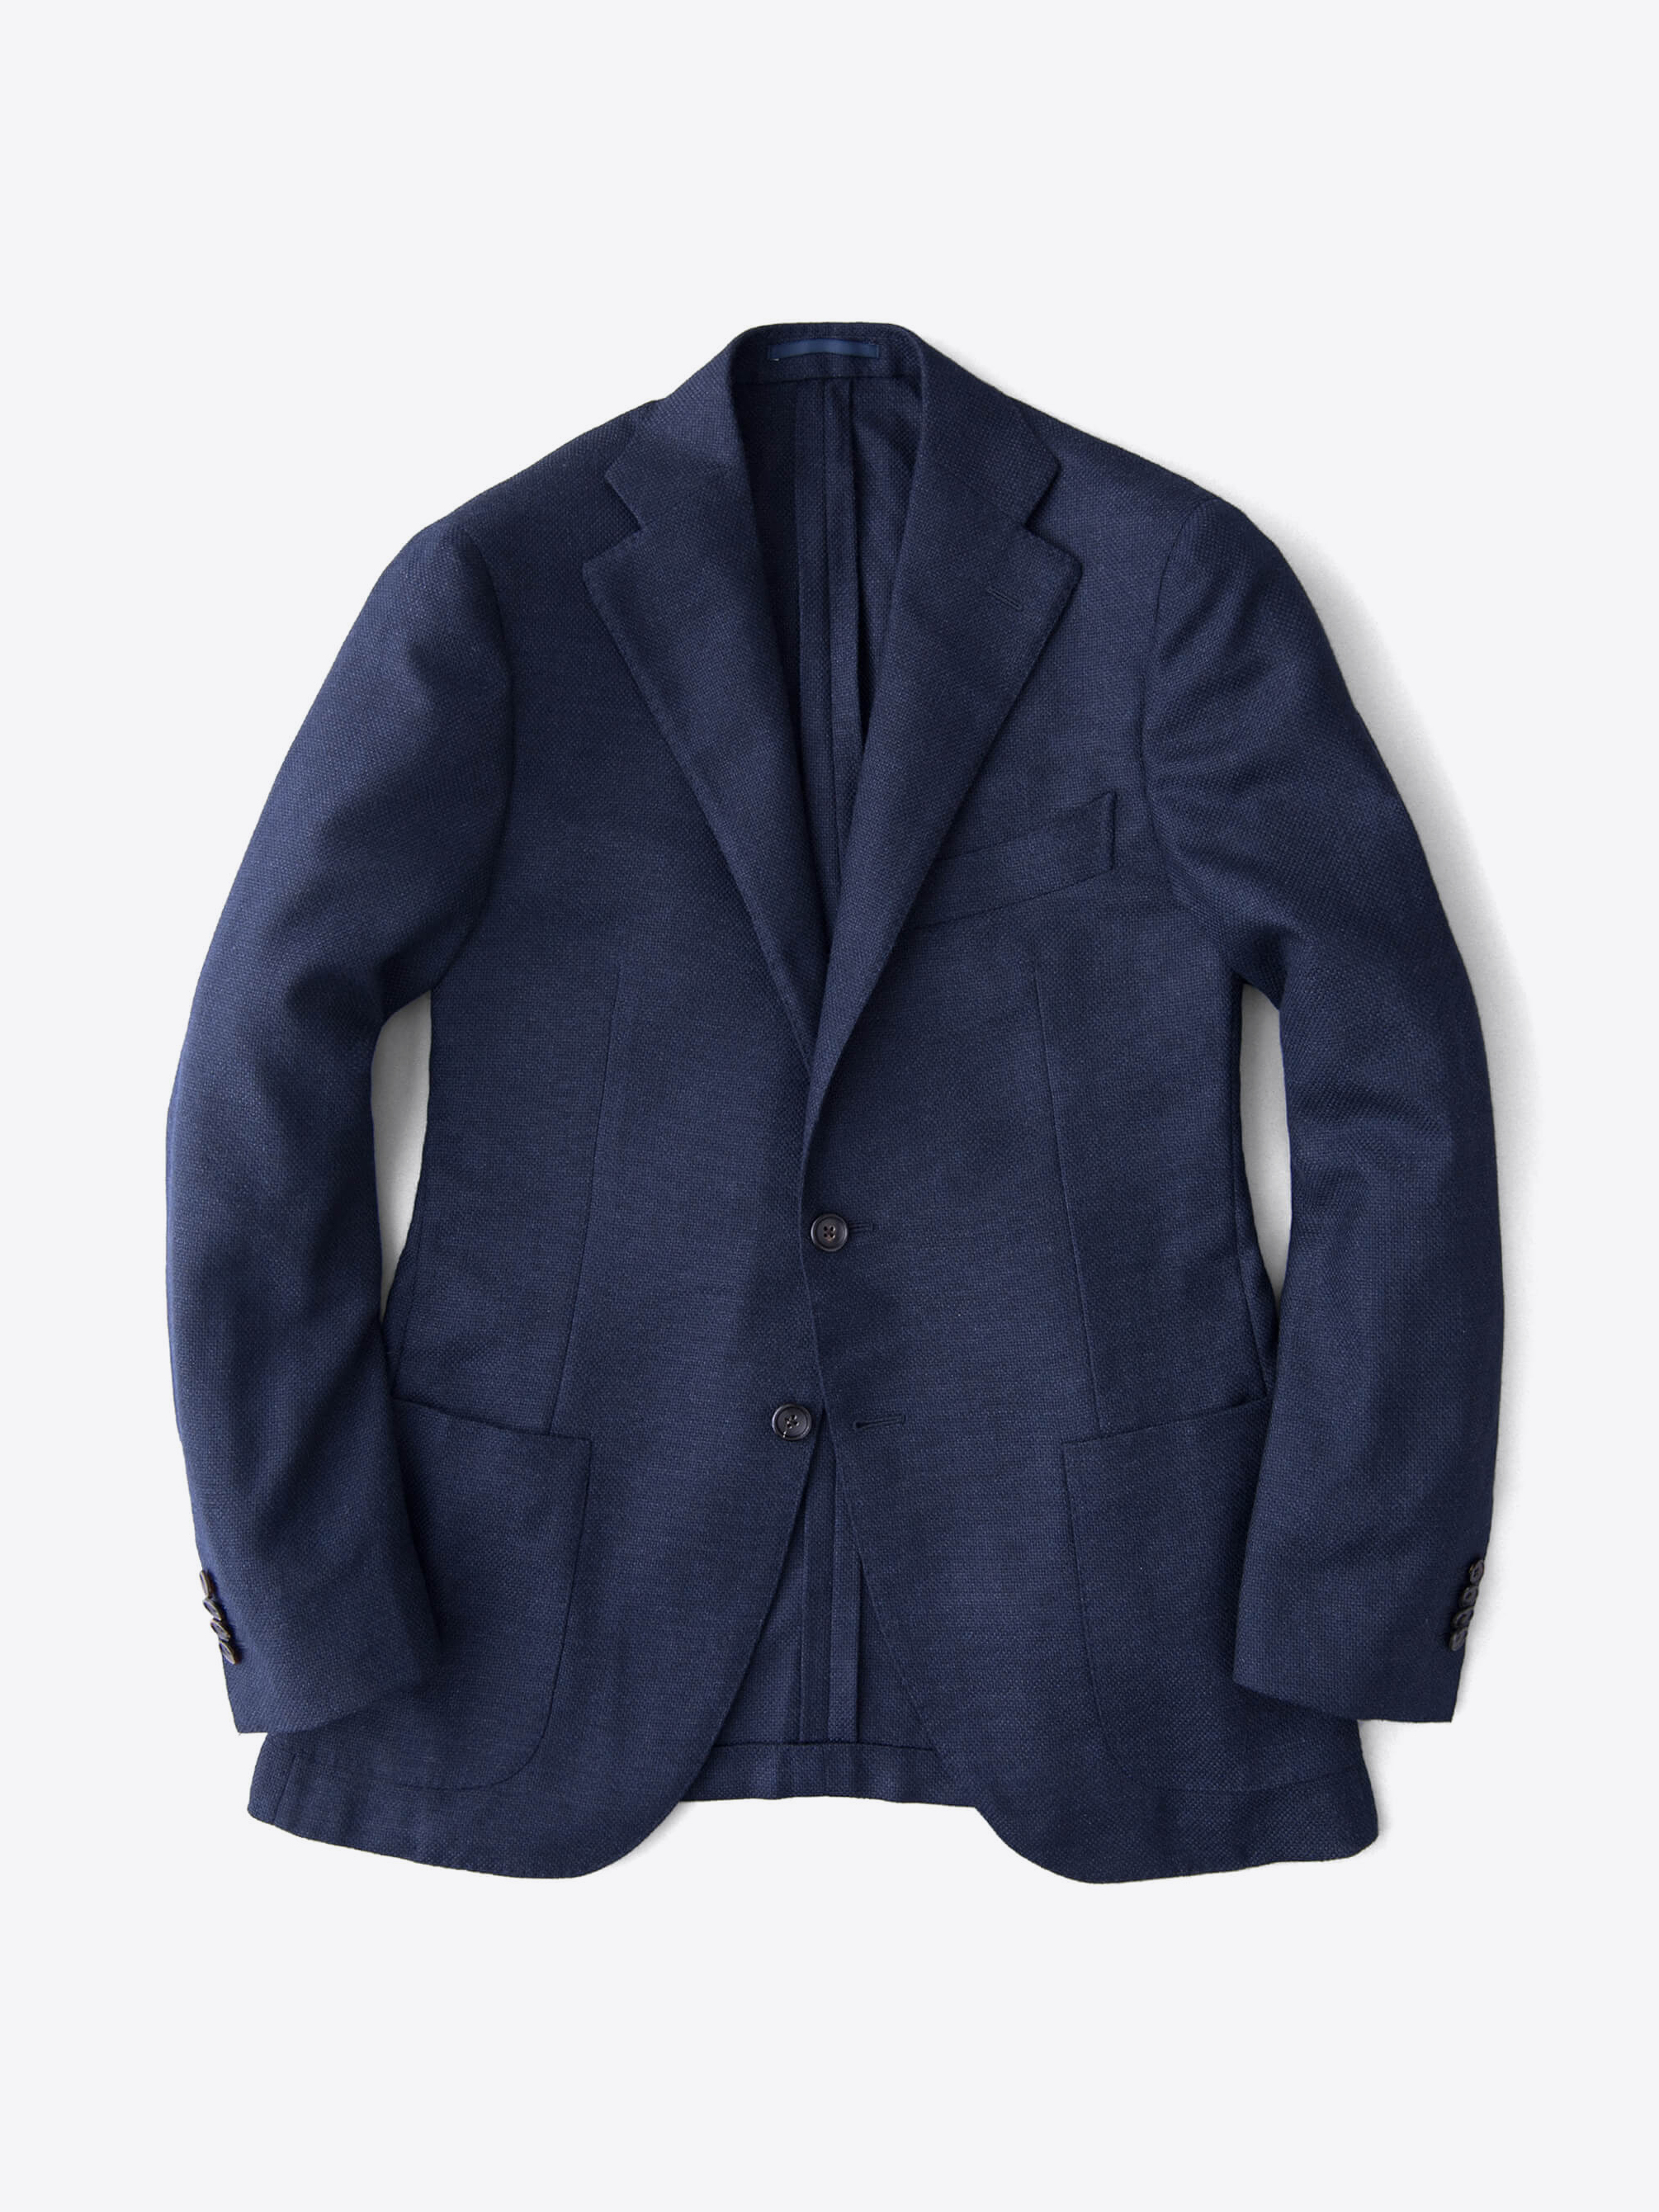 Zoom Image of Hudson Navy Wool and Cashmere Flannel Hopsack Jacket